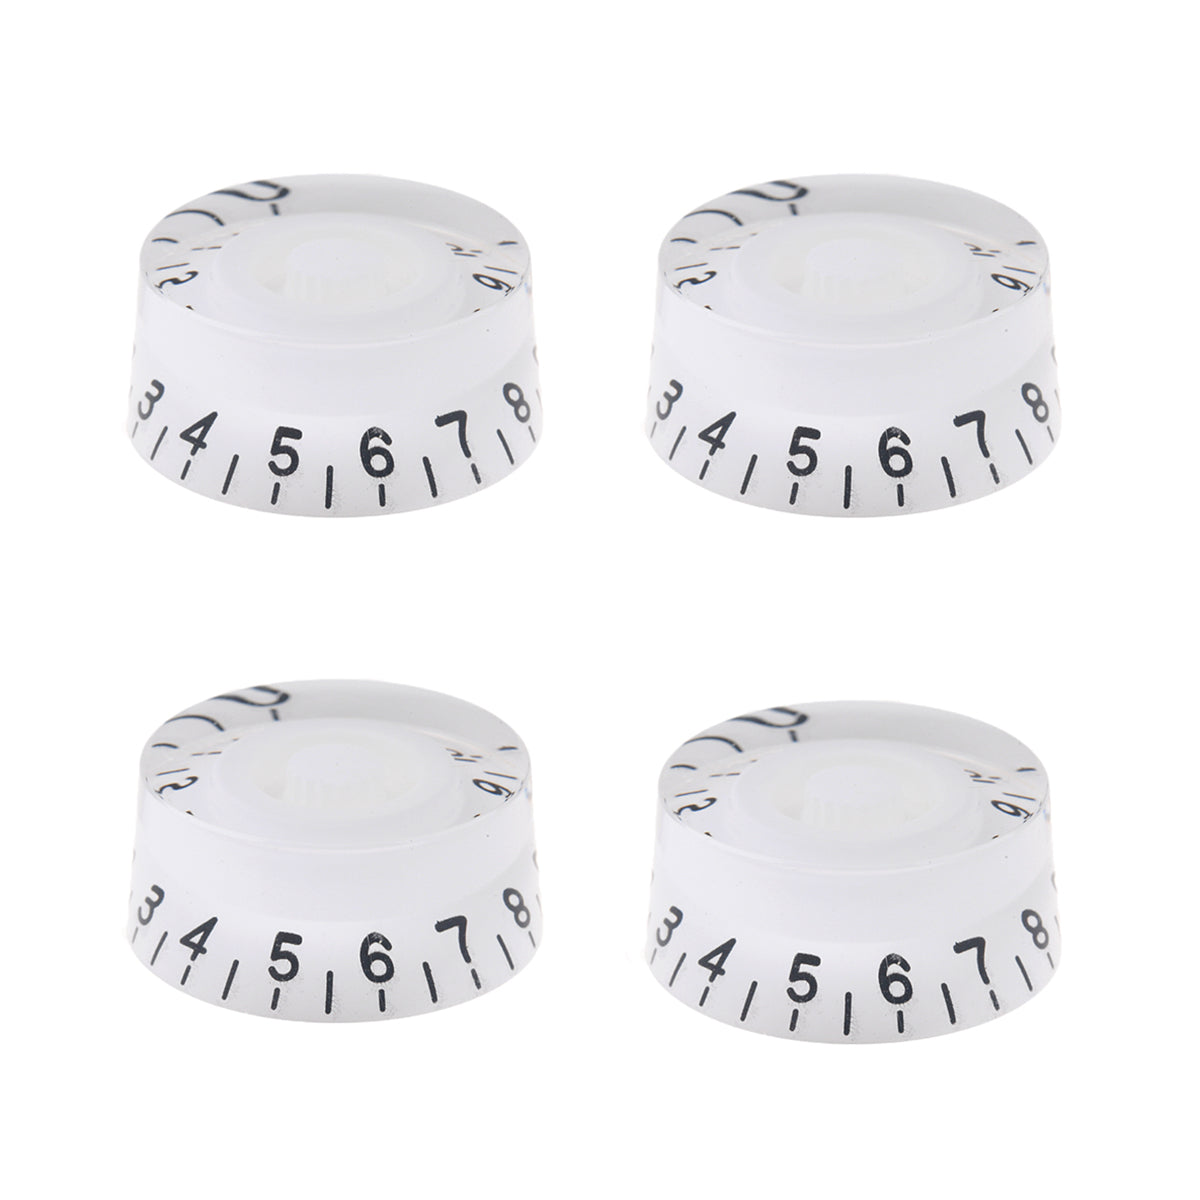 Musiclily Metric 6mm Plastic LP Style Guitar Speed Control Knobs ,White ( 4 Pieces)